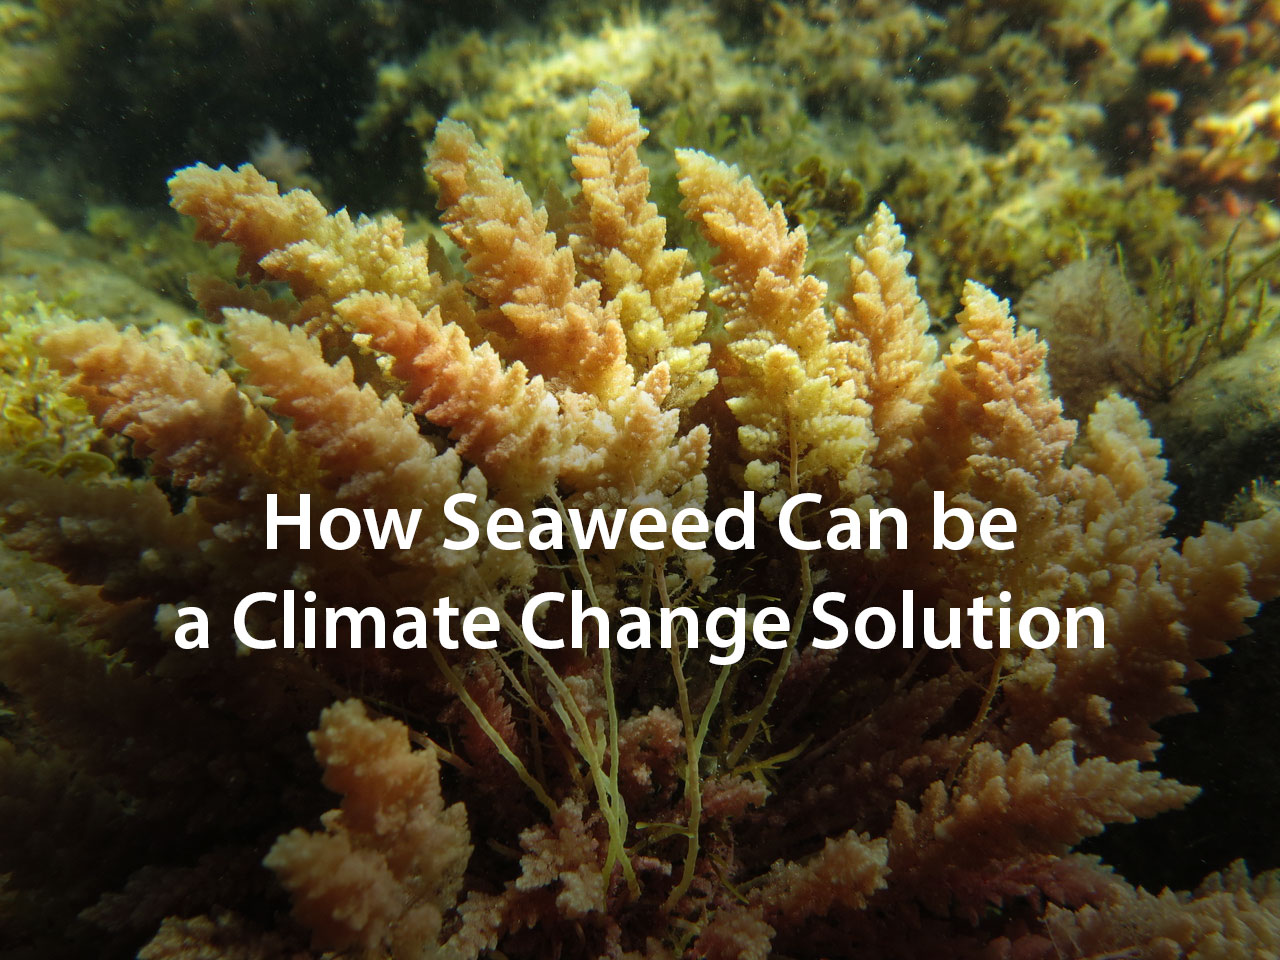 How Seaweed Can Be a Climate Change Solution